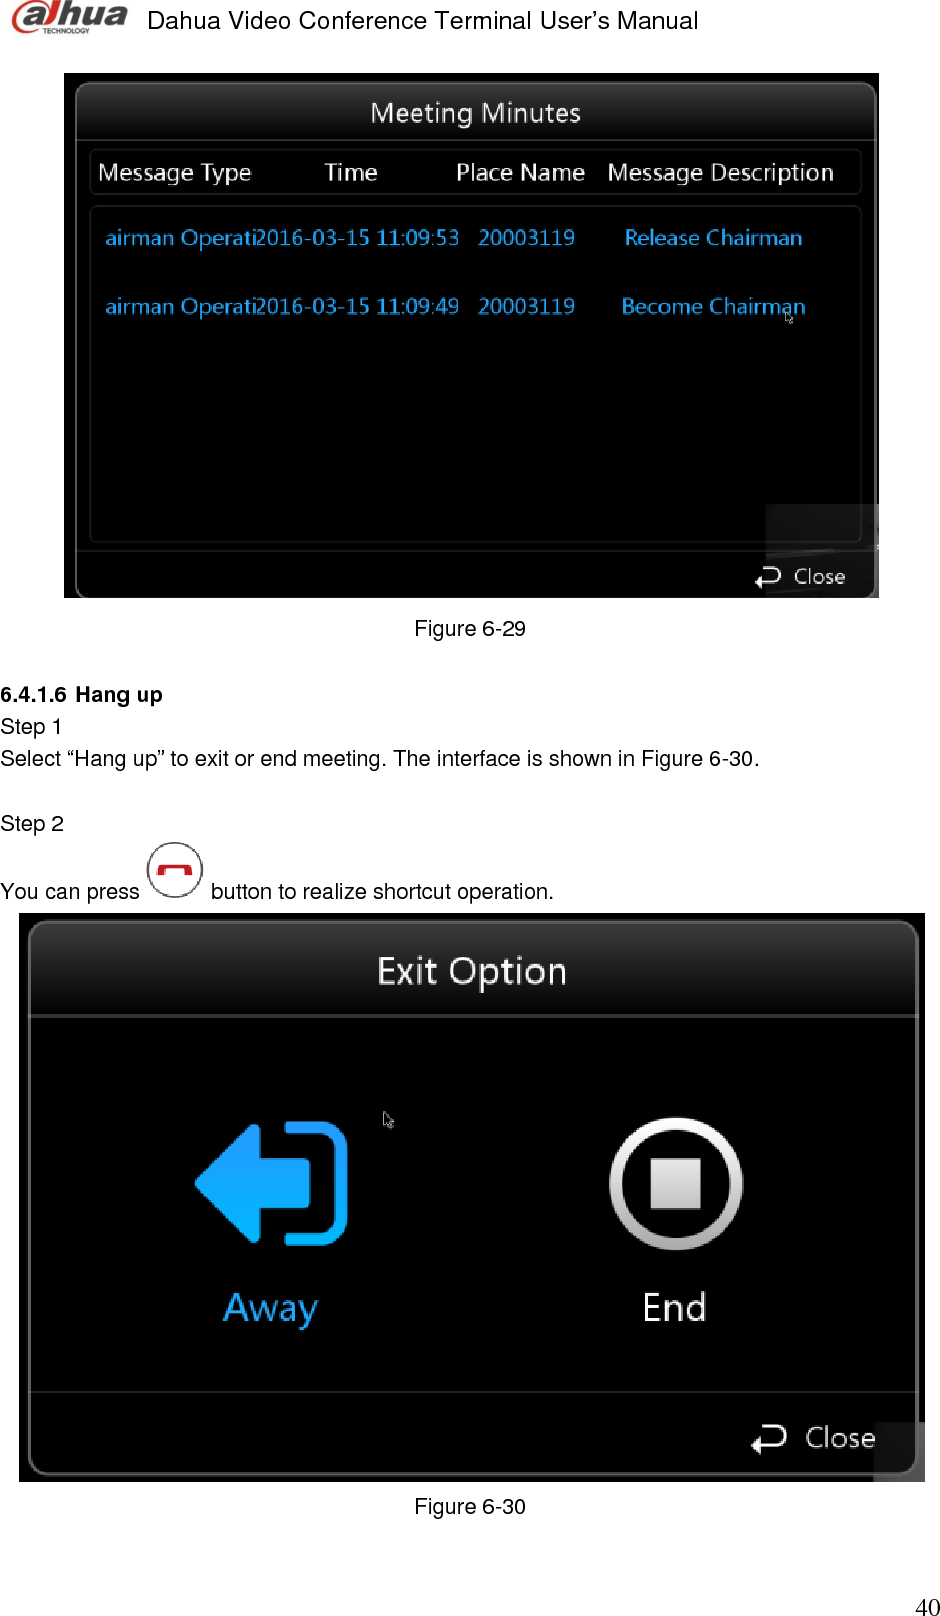  Dahua Video Conference Terminal User’s Manual                                                                              40  Figure 6-29  6.4.1.6 Hang up Step 1  Select “Hang up” to exit or end meeting. The interface is shown in Figure 6-30.  Step 2  You can press   button to realize shortcut operation.   Figure 6-30  